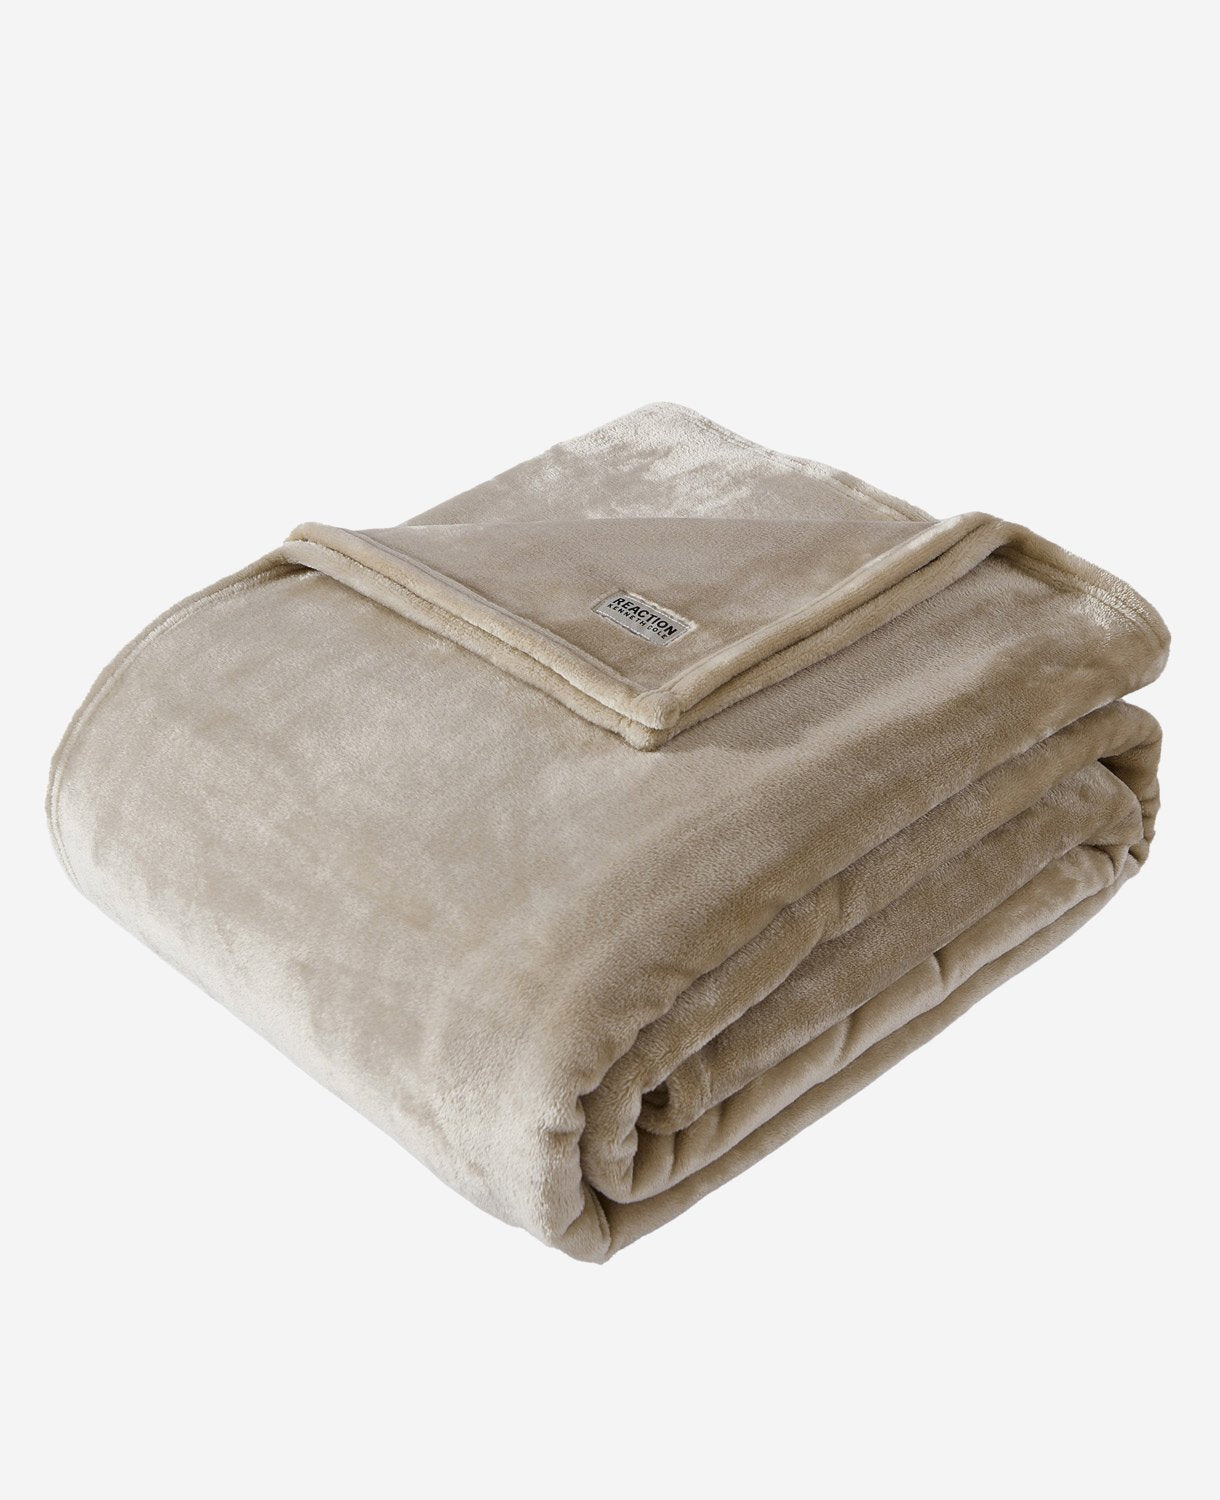 KENNETH COLE SOLID ULTRA SOFT PLUSH BLANKET